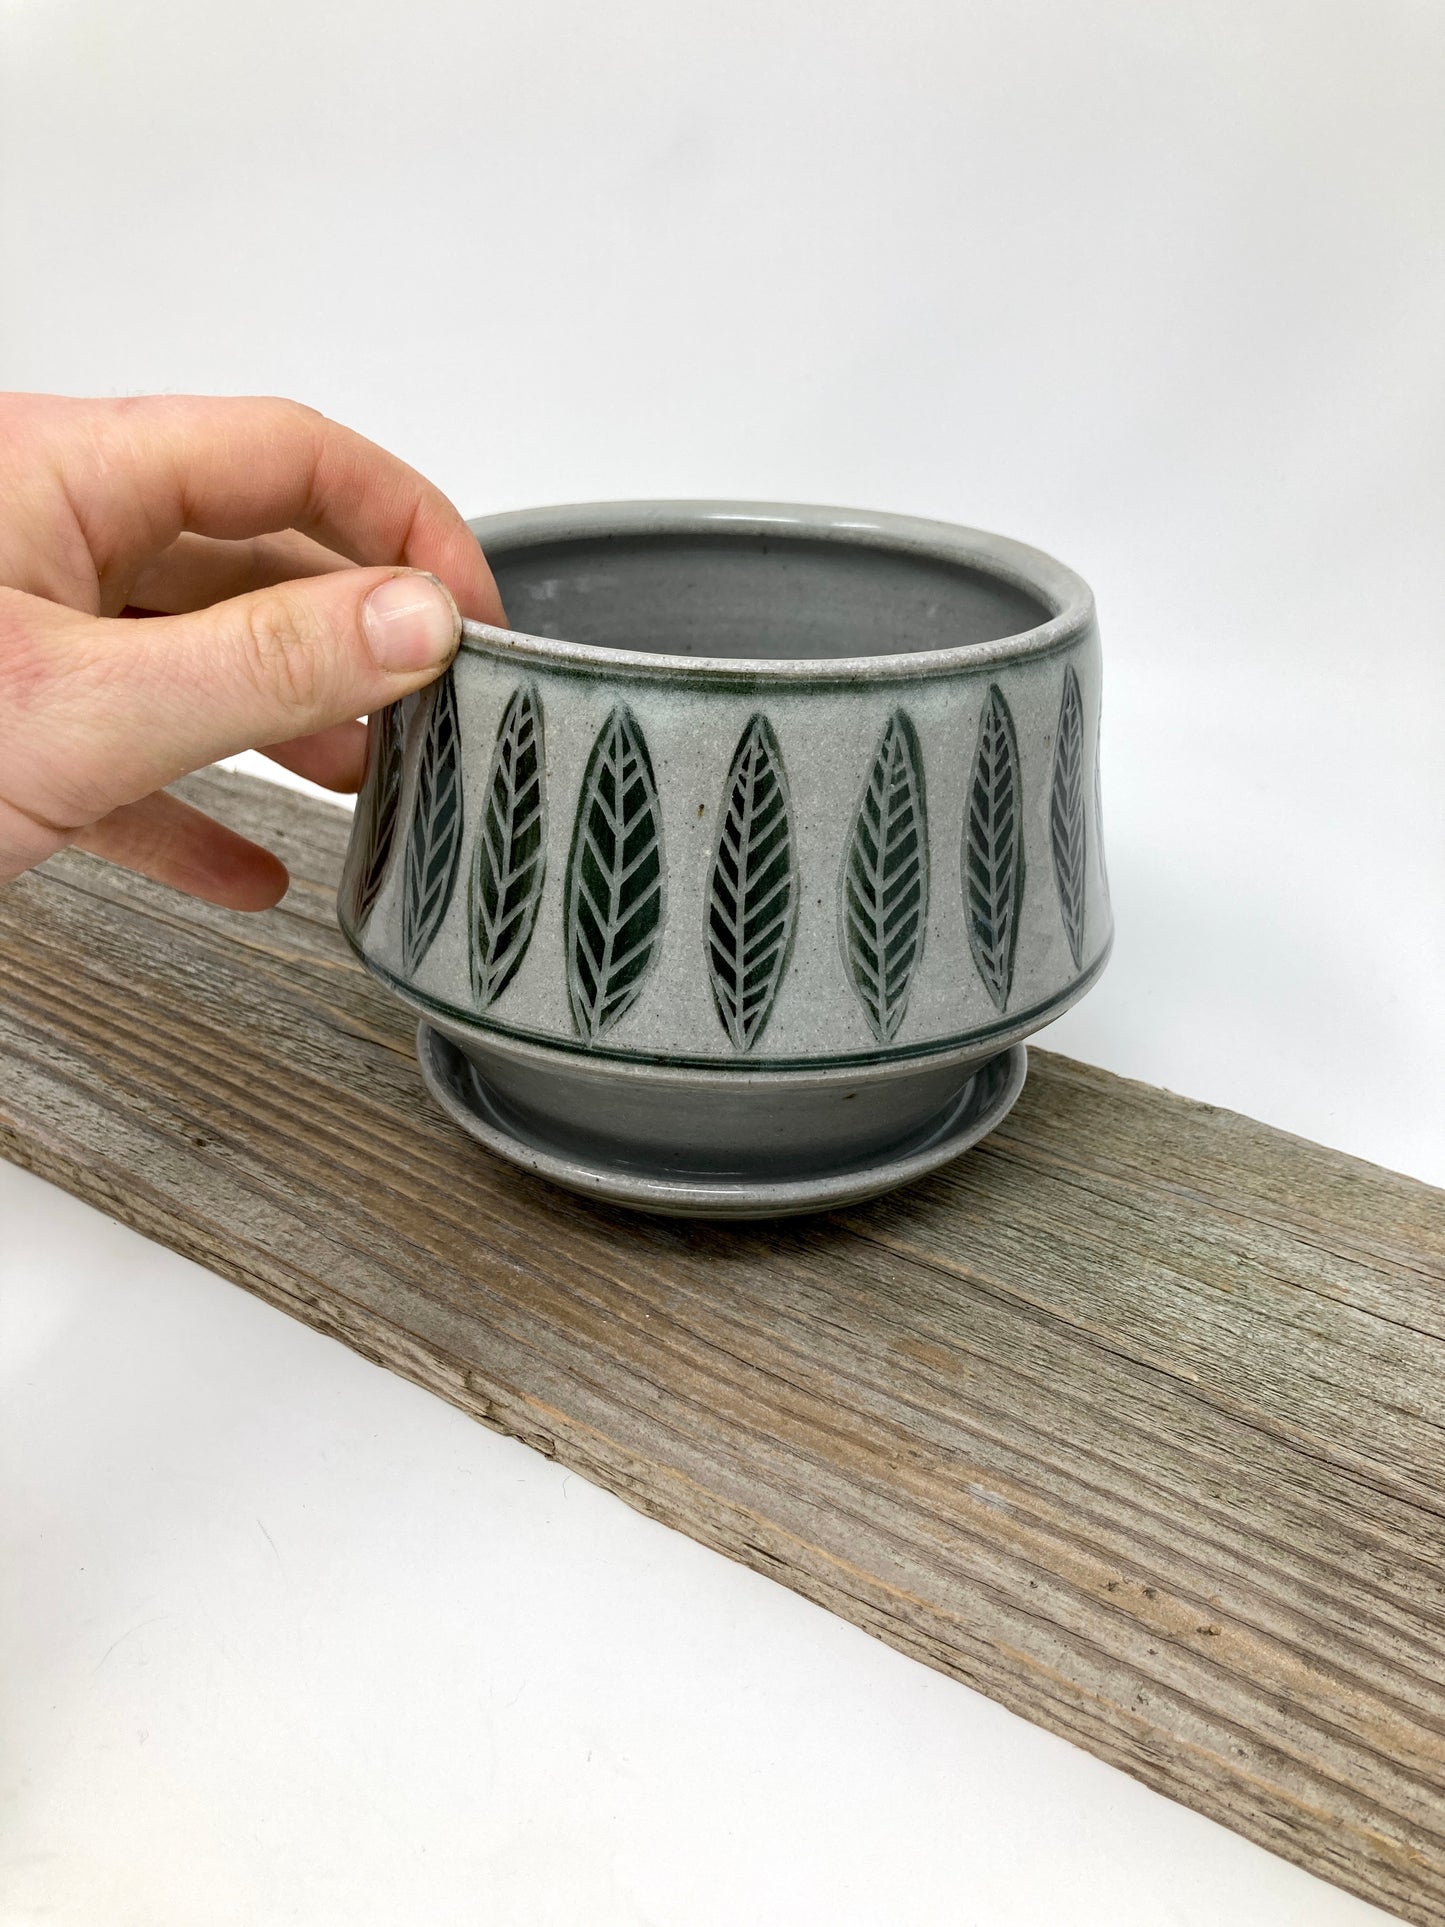 Carved Leaf Planter with Attached Drain Dish in Black and Gray